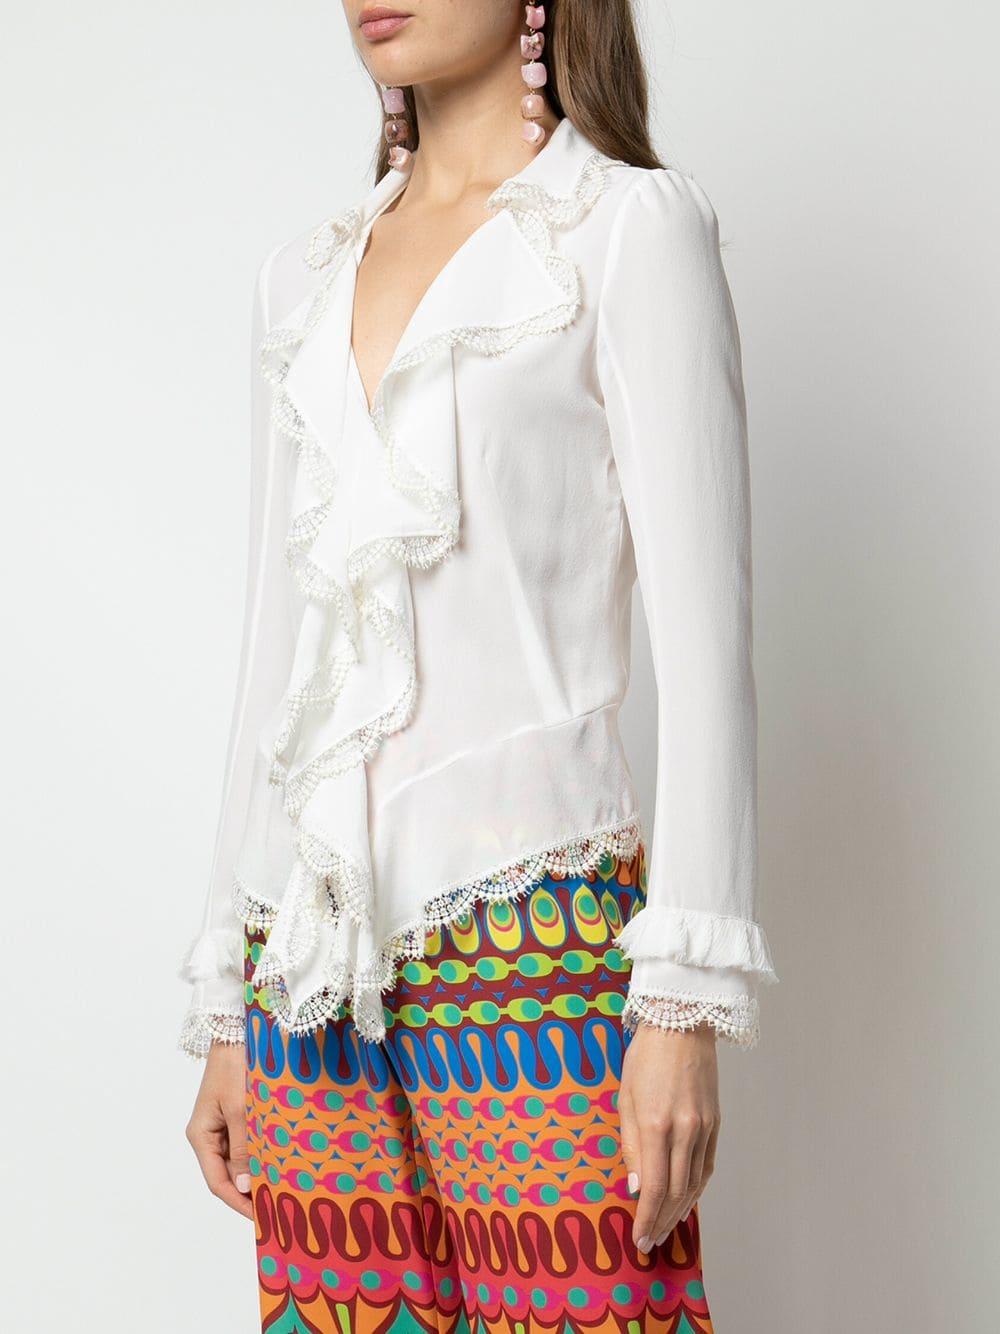 Alexis Cotton Phineas Blouse in White - Lyst